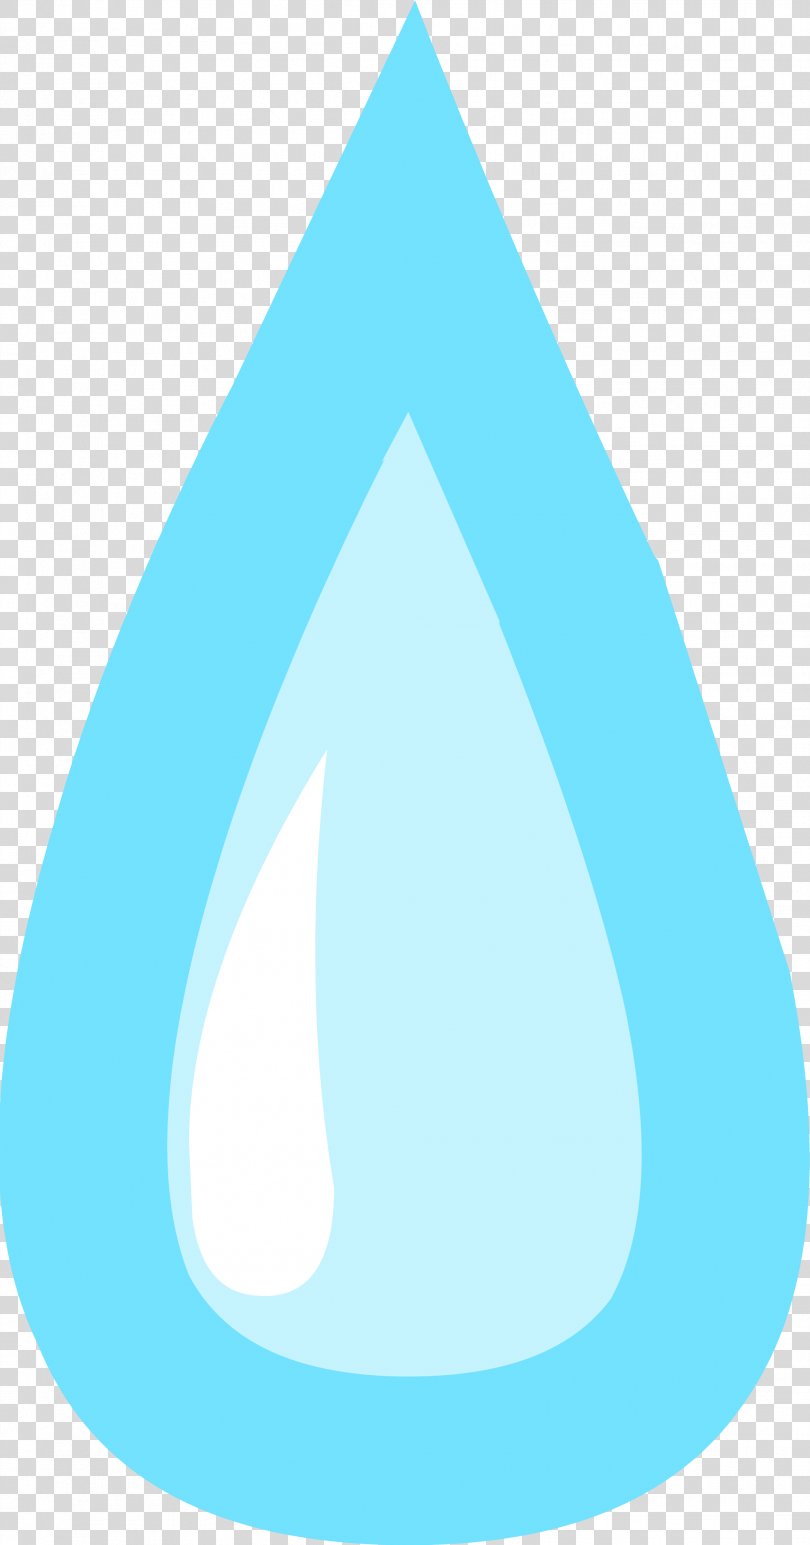 Triangle Teal Turquoise Circle, Tears PNG